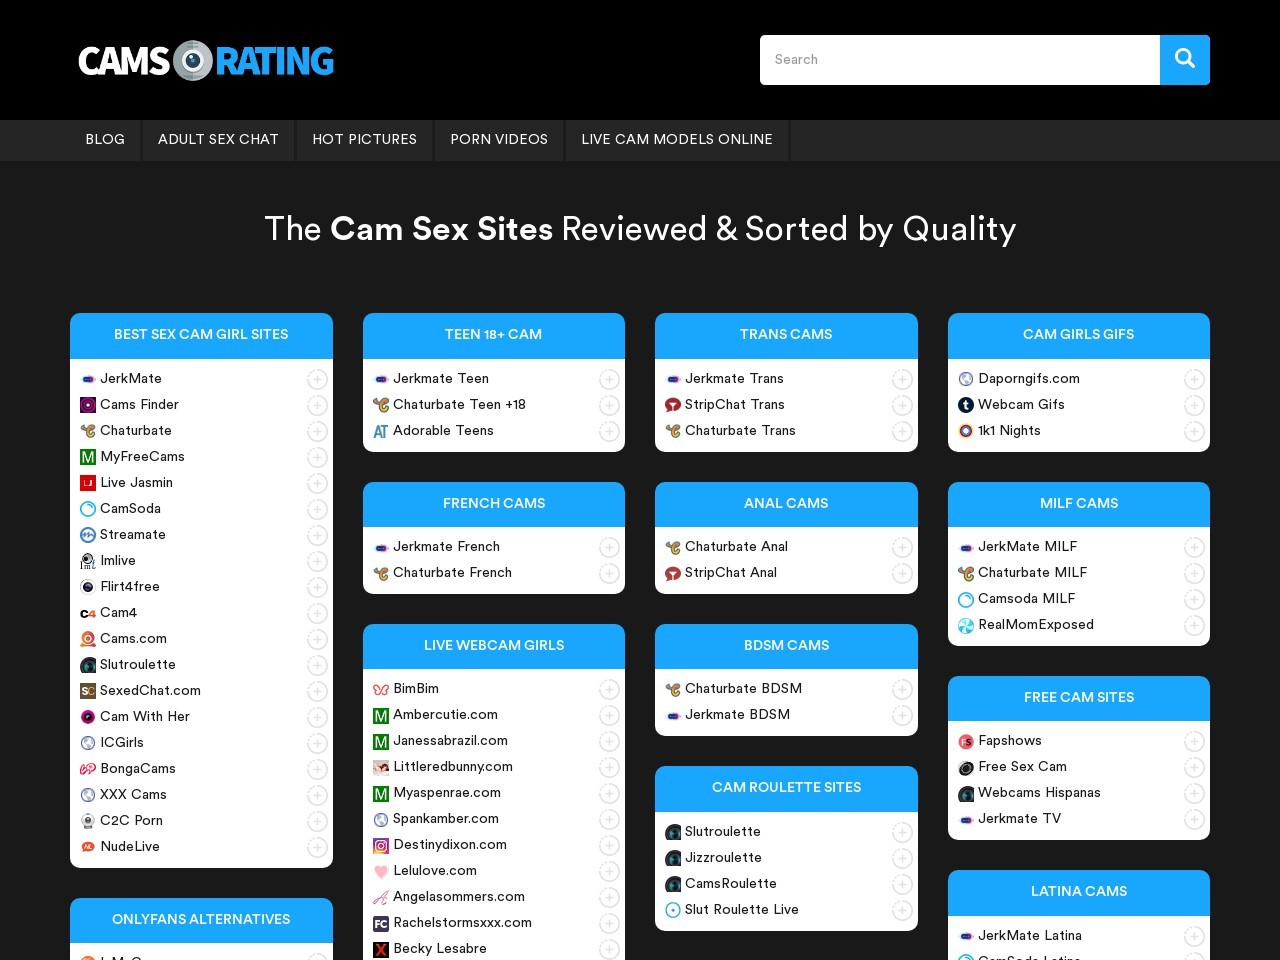 Cams Rating Review